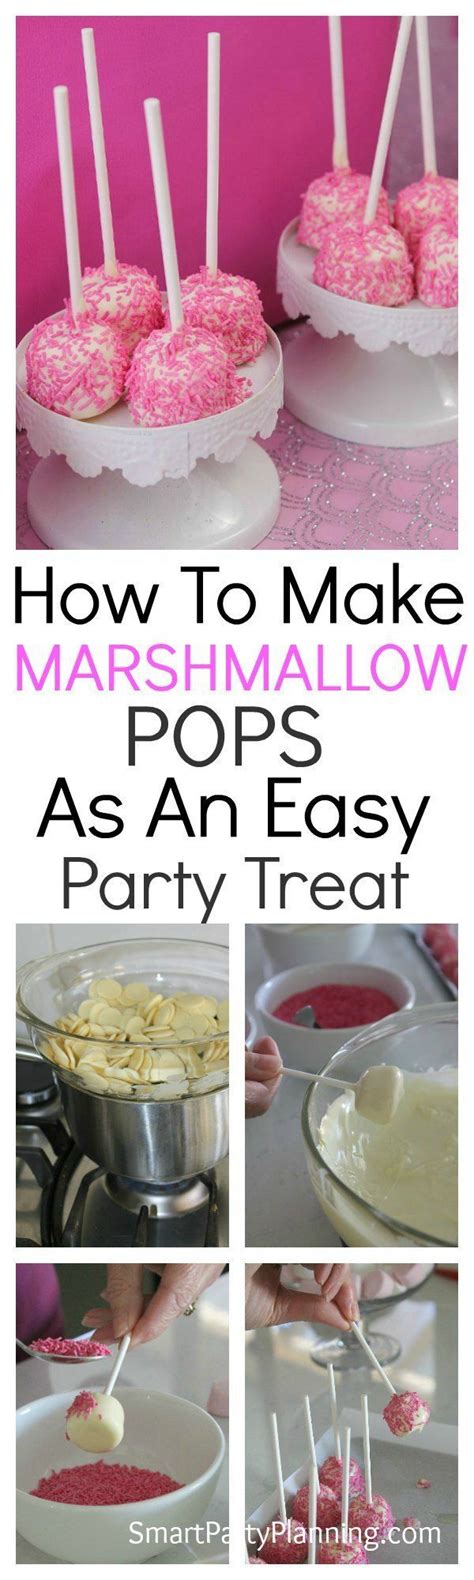 How to make cake by using toaster : How to make marshmallow pops the easy way using a simple ...